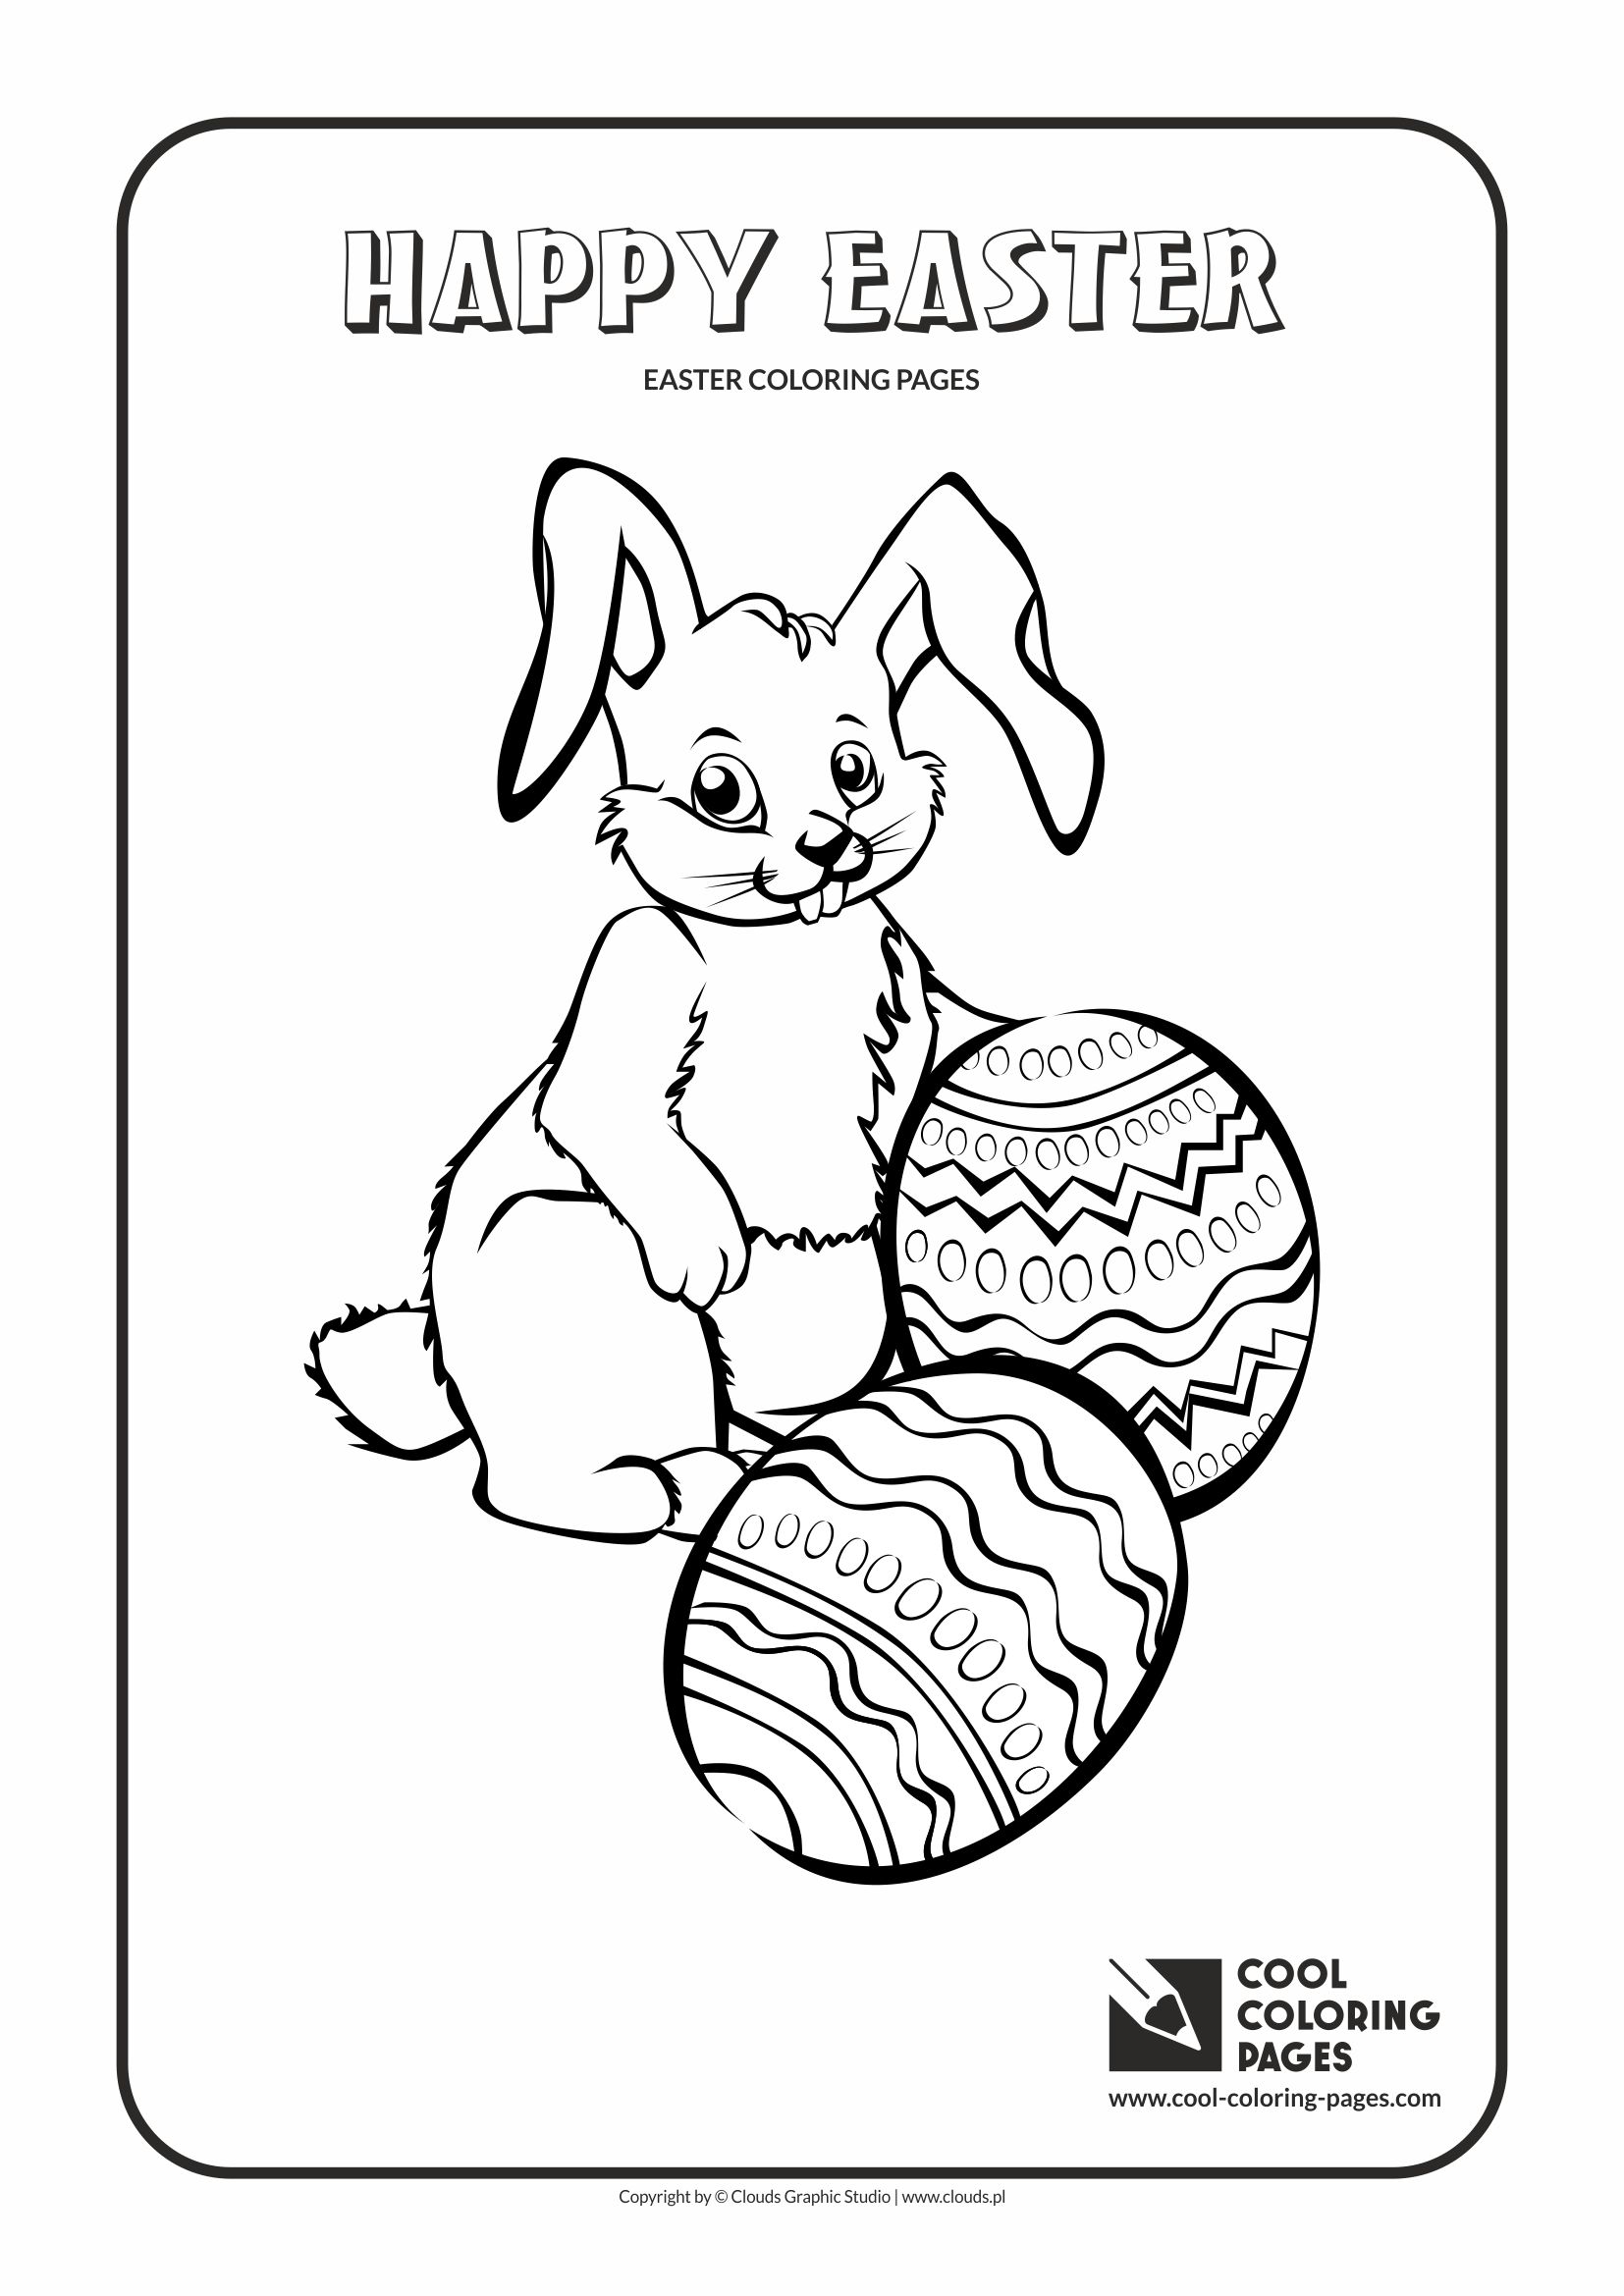 Cool Coloring Pages - Holidays / Easter bunny no 1 / Coloring page with Easter bunny no 1